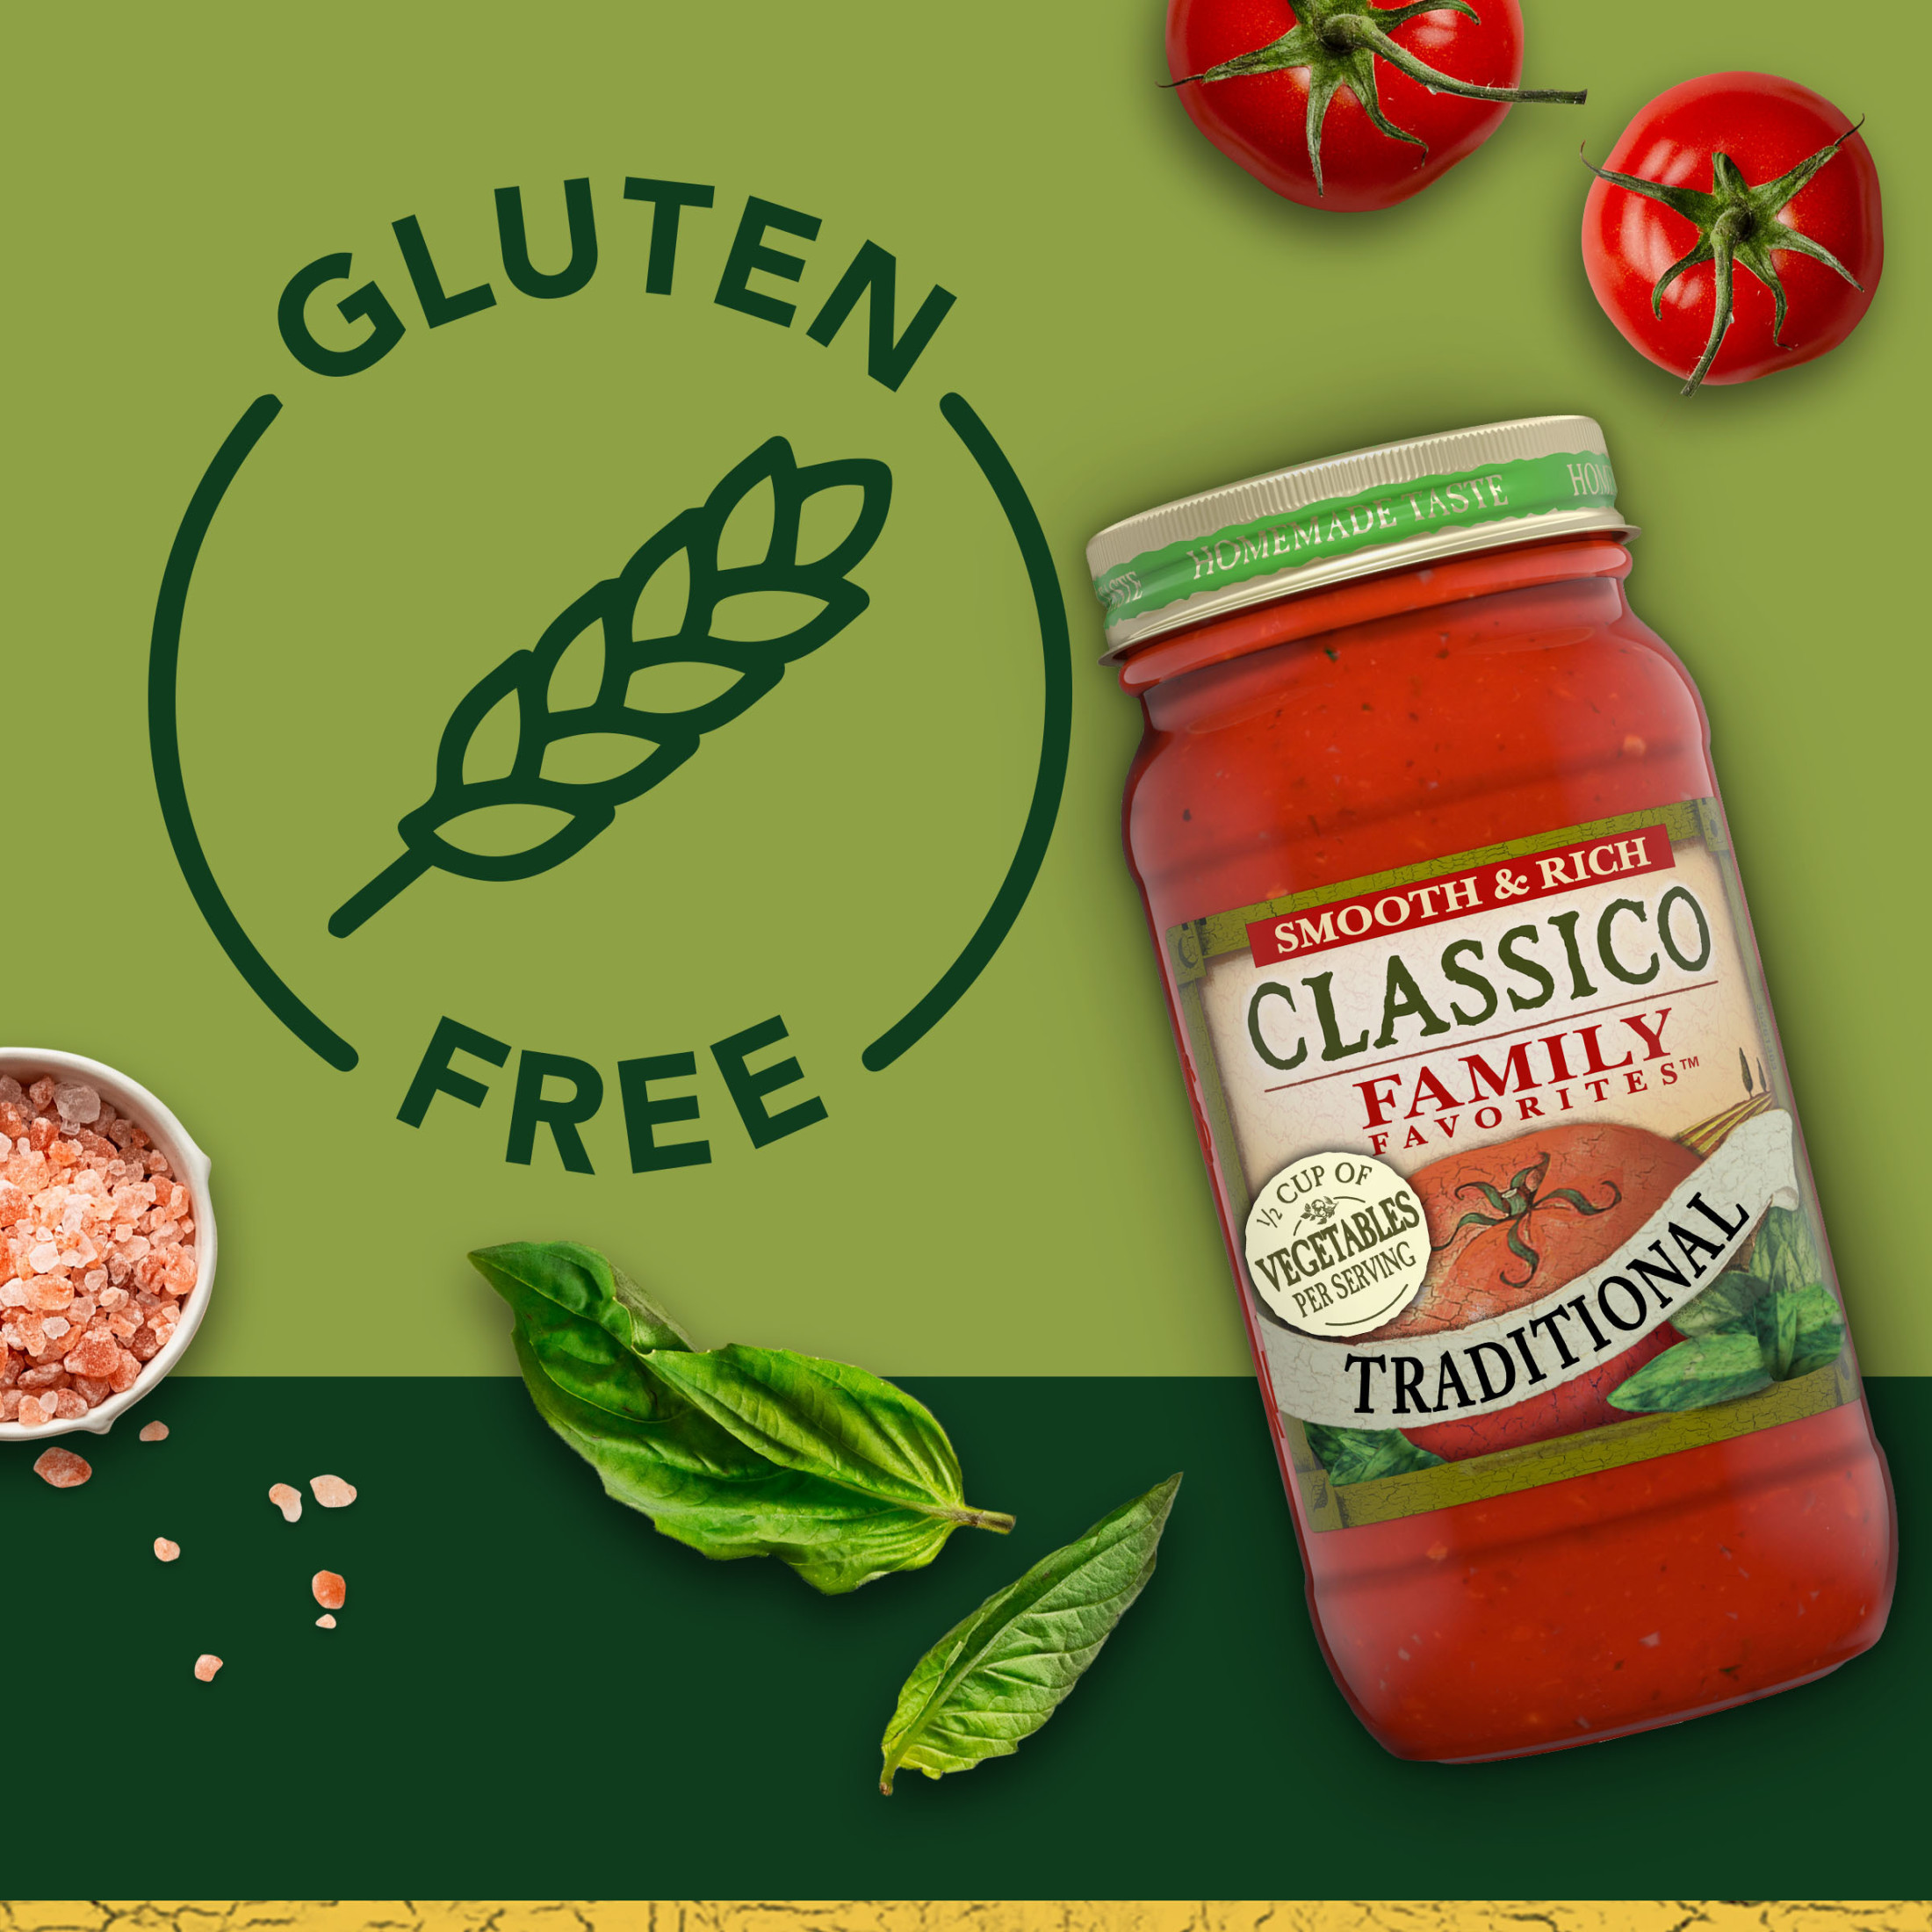 Classico Family Favorites Traditional Smooth & Rich Spaghetti Pasta Sauce, 24 oz. Jar - image 4 of 13